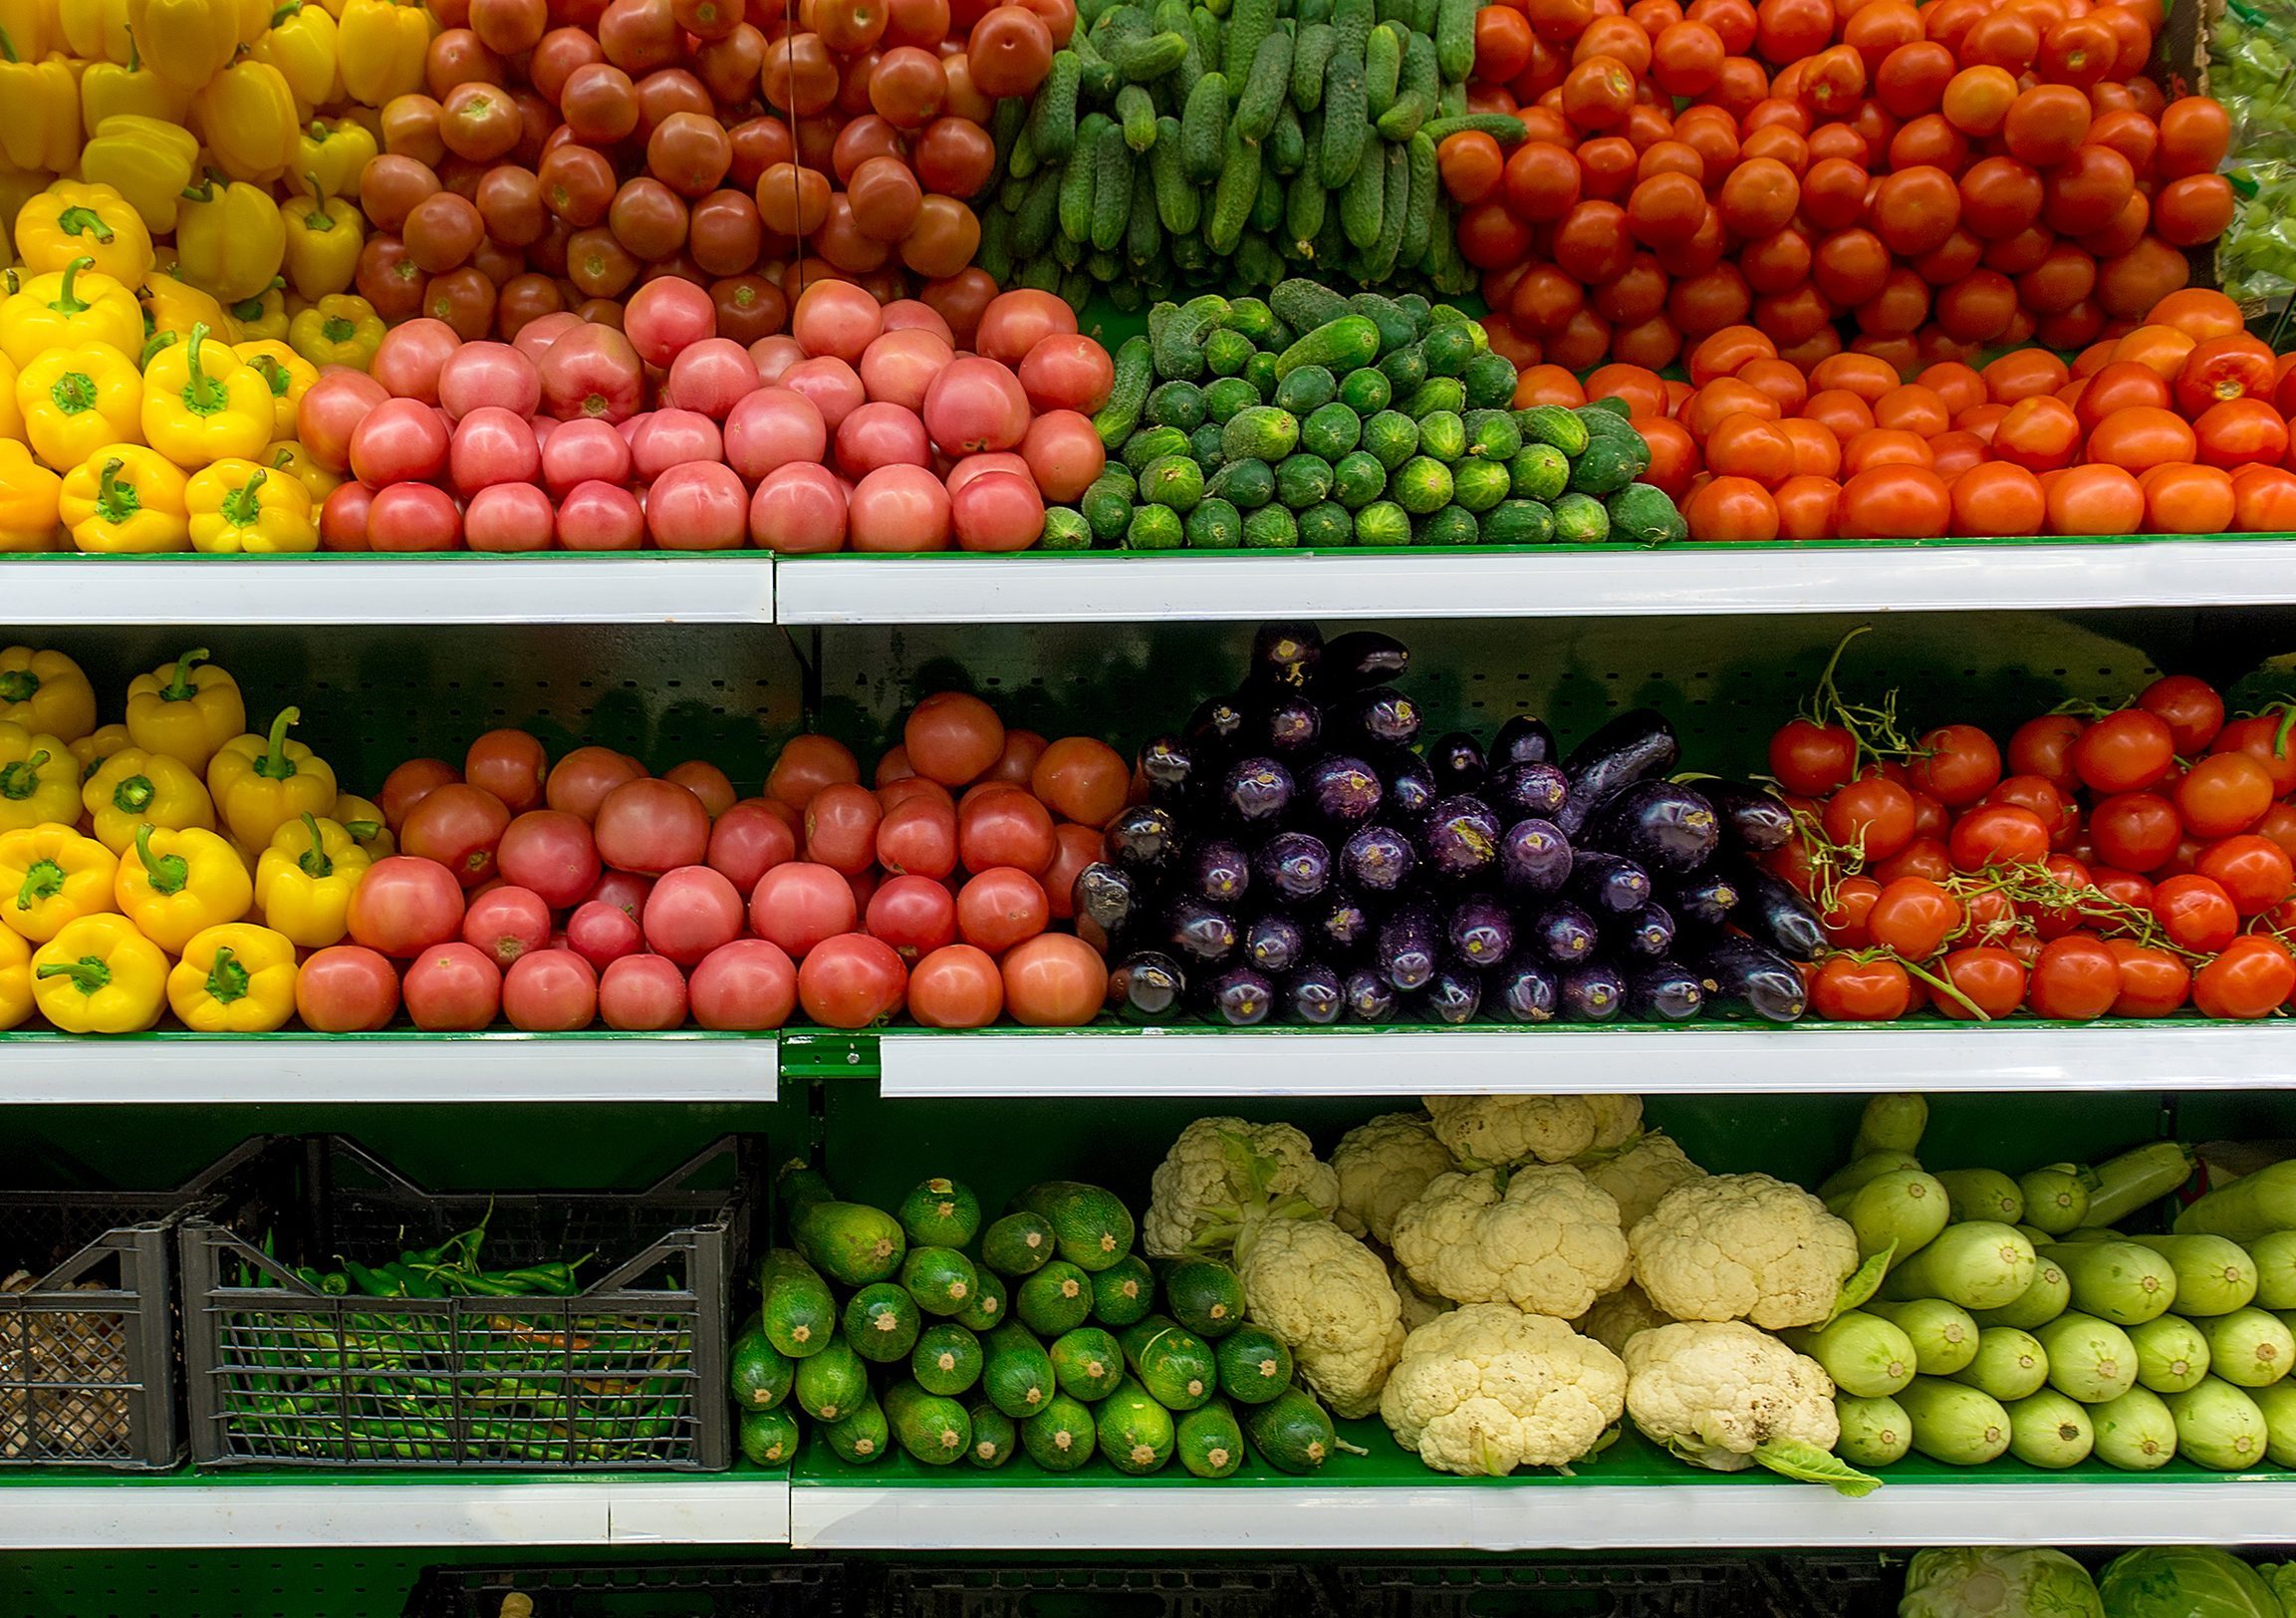 Inflation slowed to 0.8% from 1% last month thanks to shelves full of locally-grown fruit and vegetables (iStock)